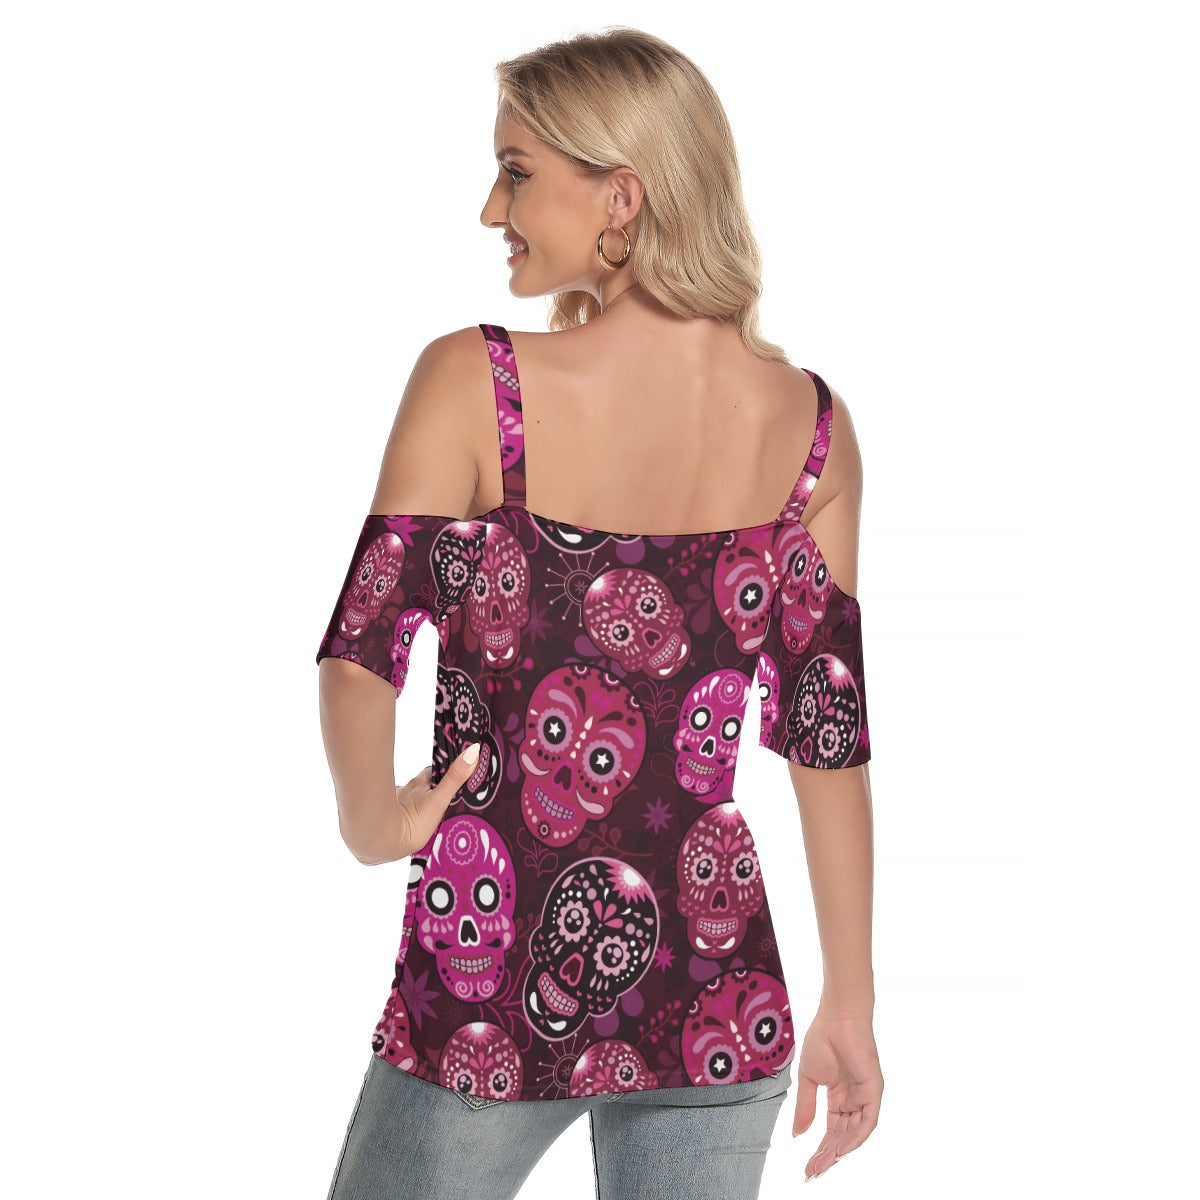 Sugar skull pattern Women's Cold Shoulder T-shirt With Criss Cross Strips